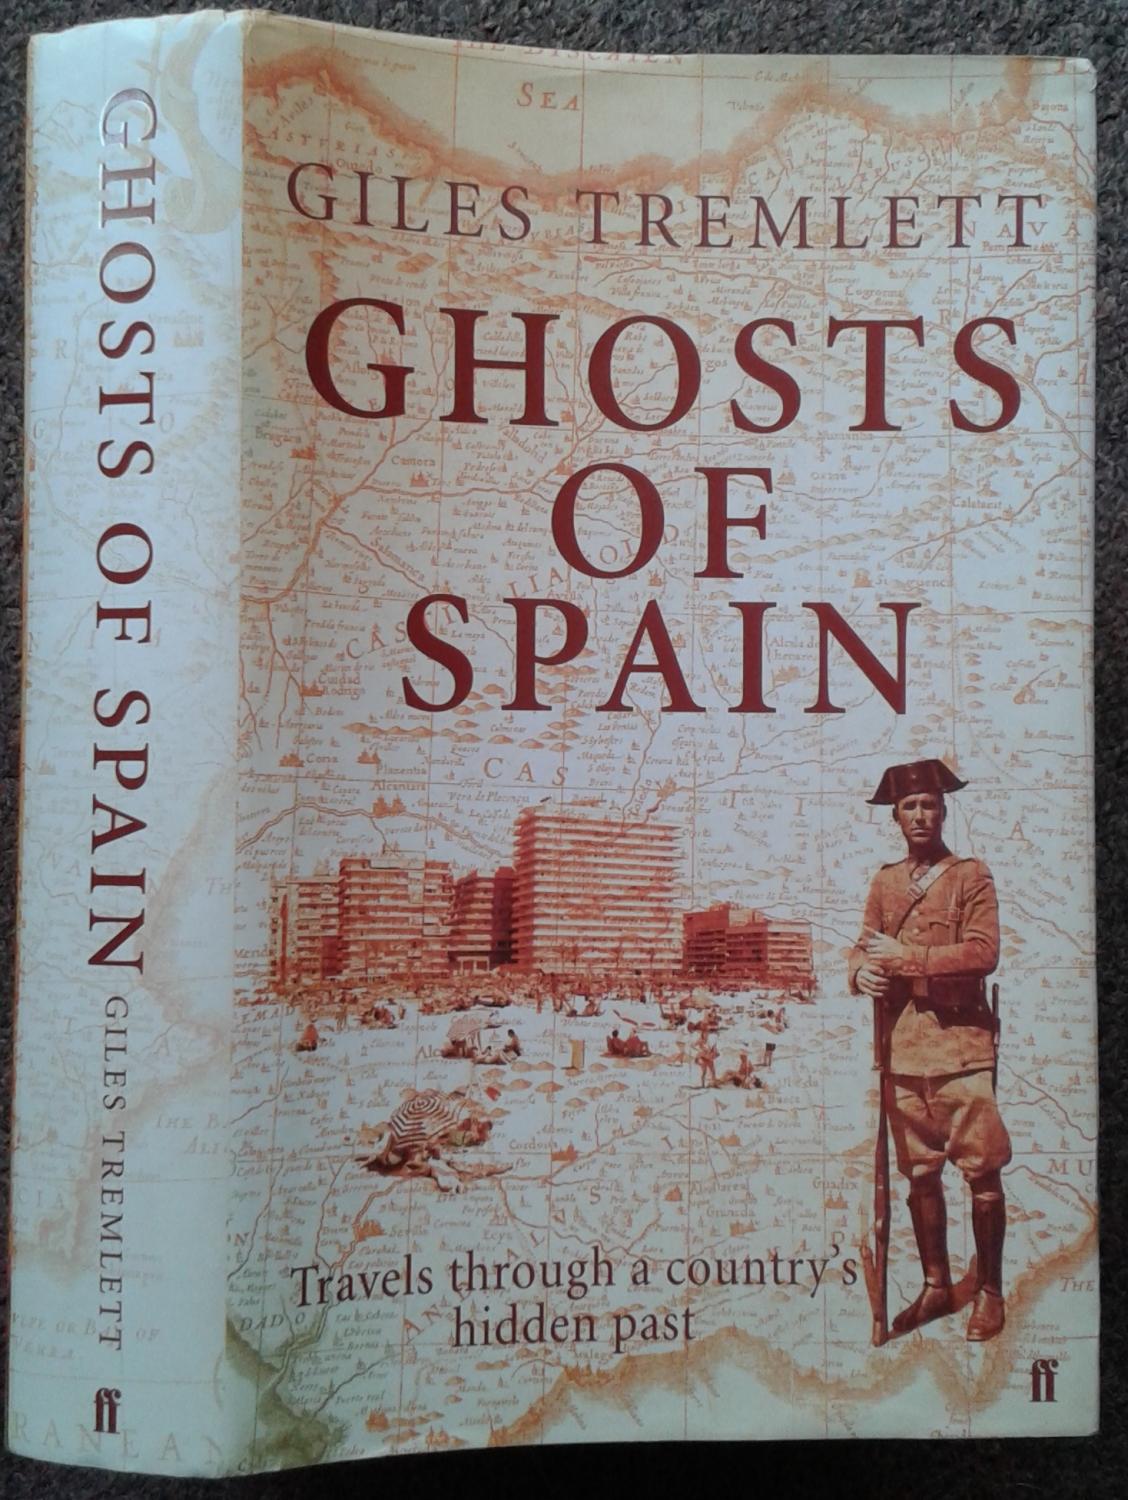 GHOSTS OF SPAIN. TRAVELS THROUGH A COUNTRY'S HIDDEN PAST. - Giles Tremlett.